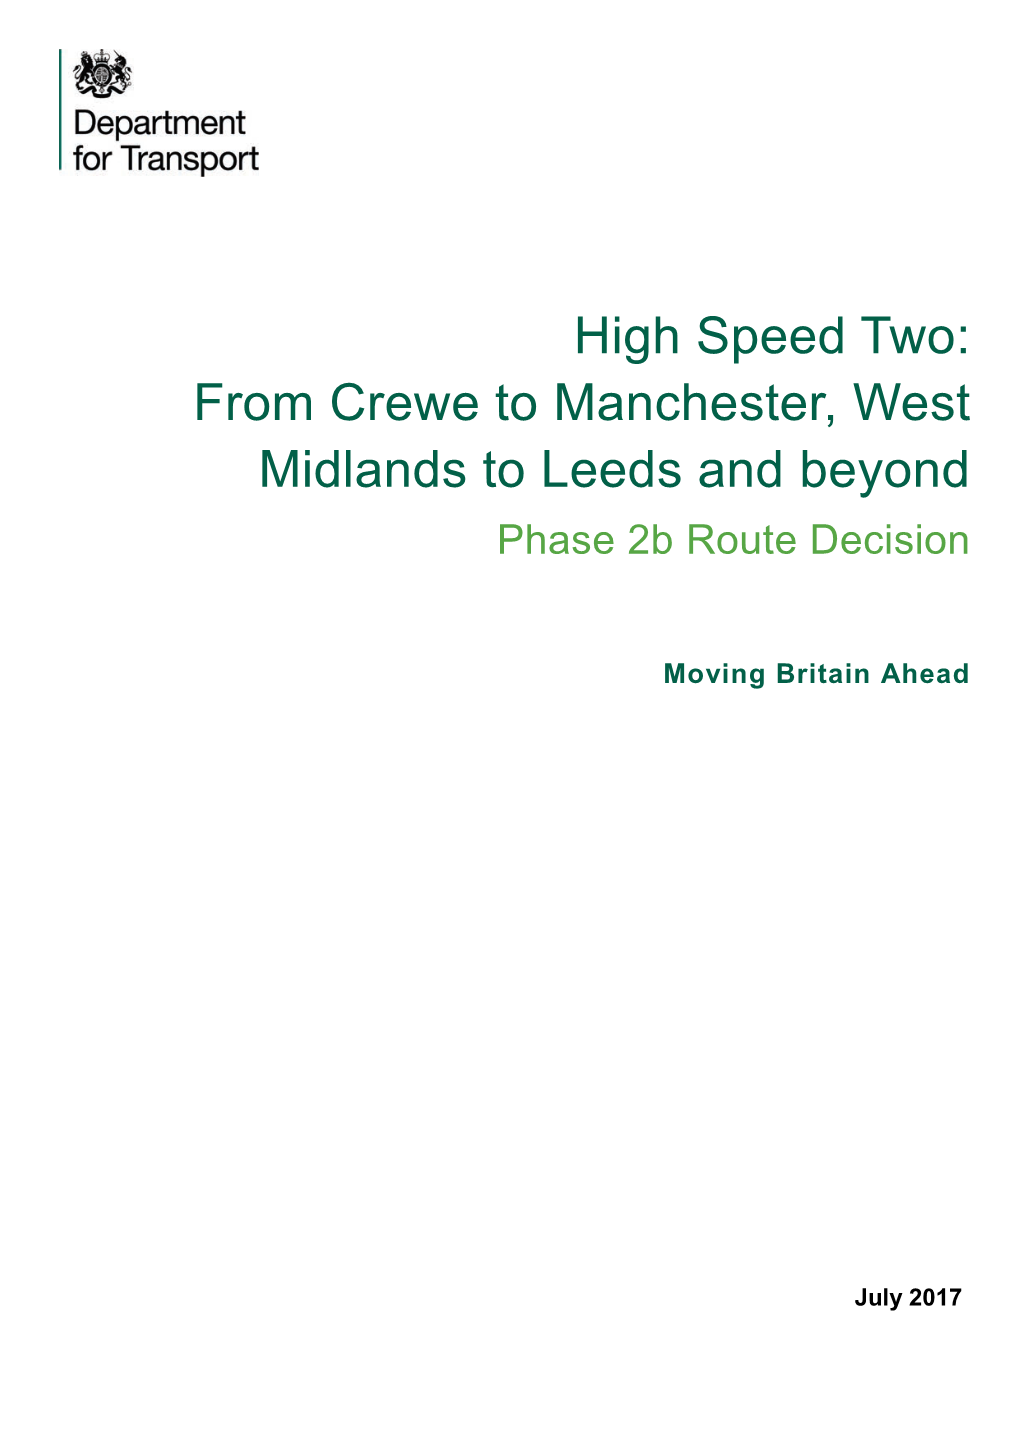 High Speed Two: from Crewe to Manchester, West Midlands to Leeds and Beyond Phase 2B Route Decision